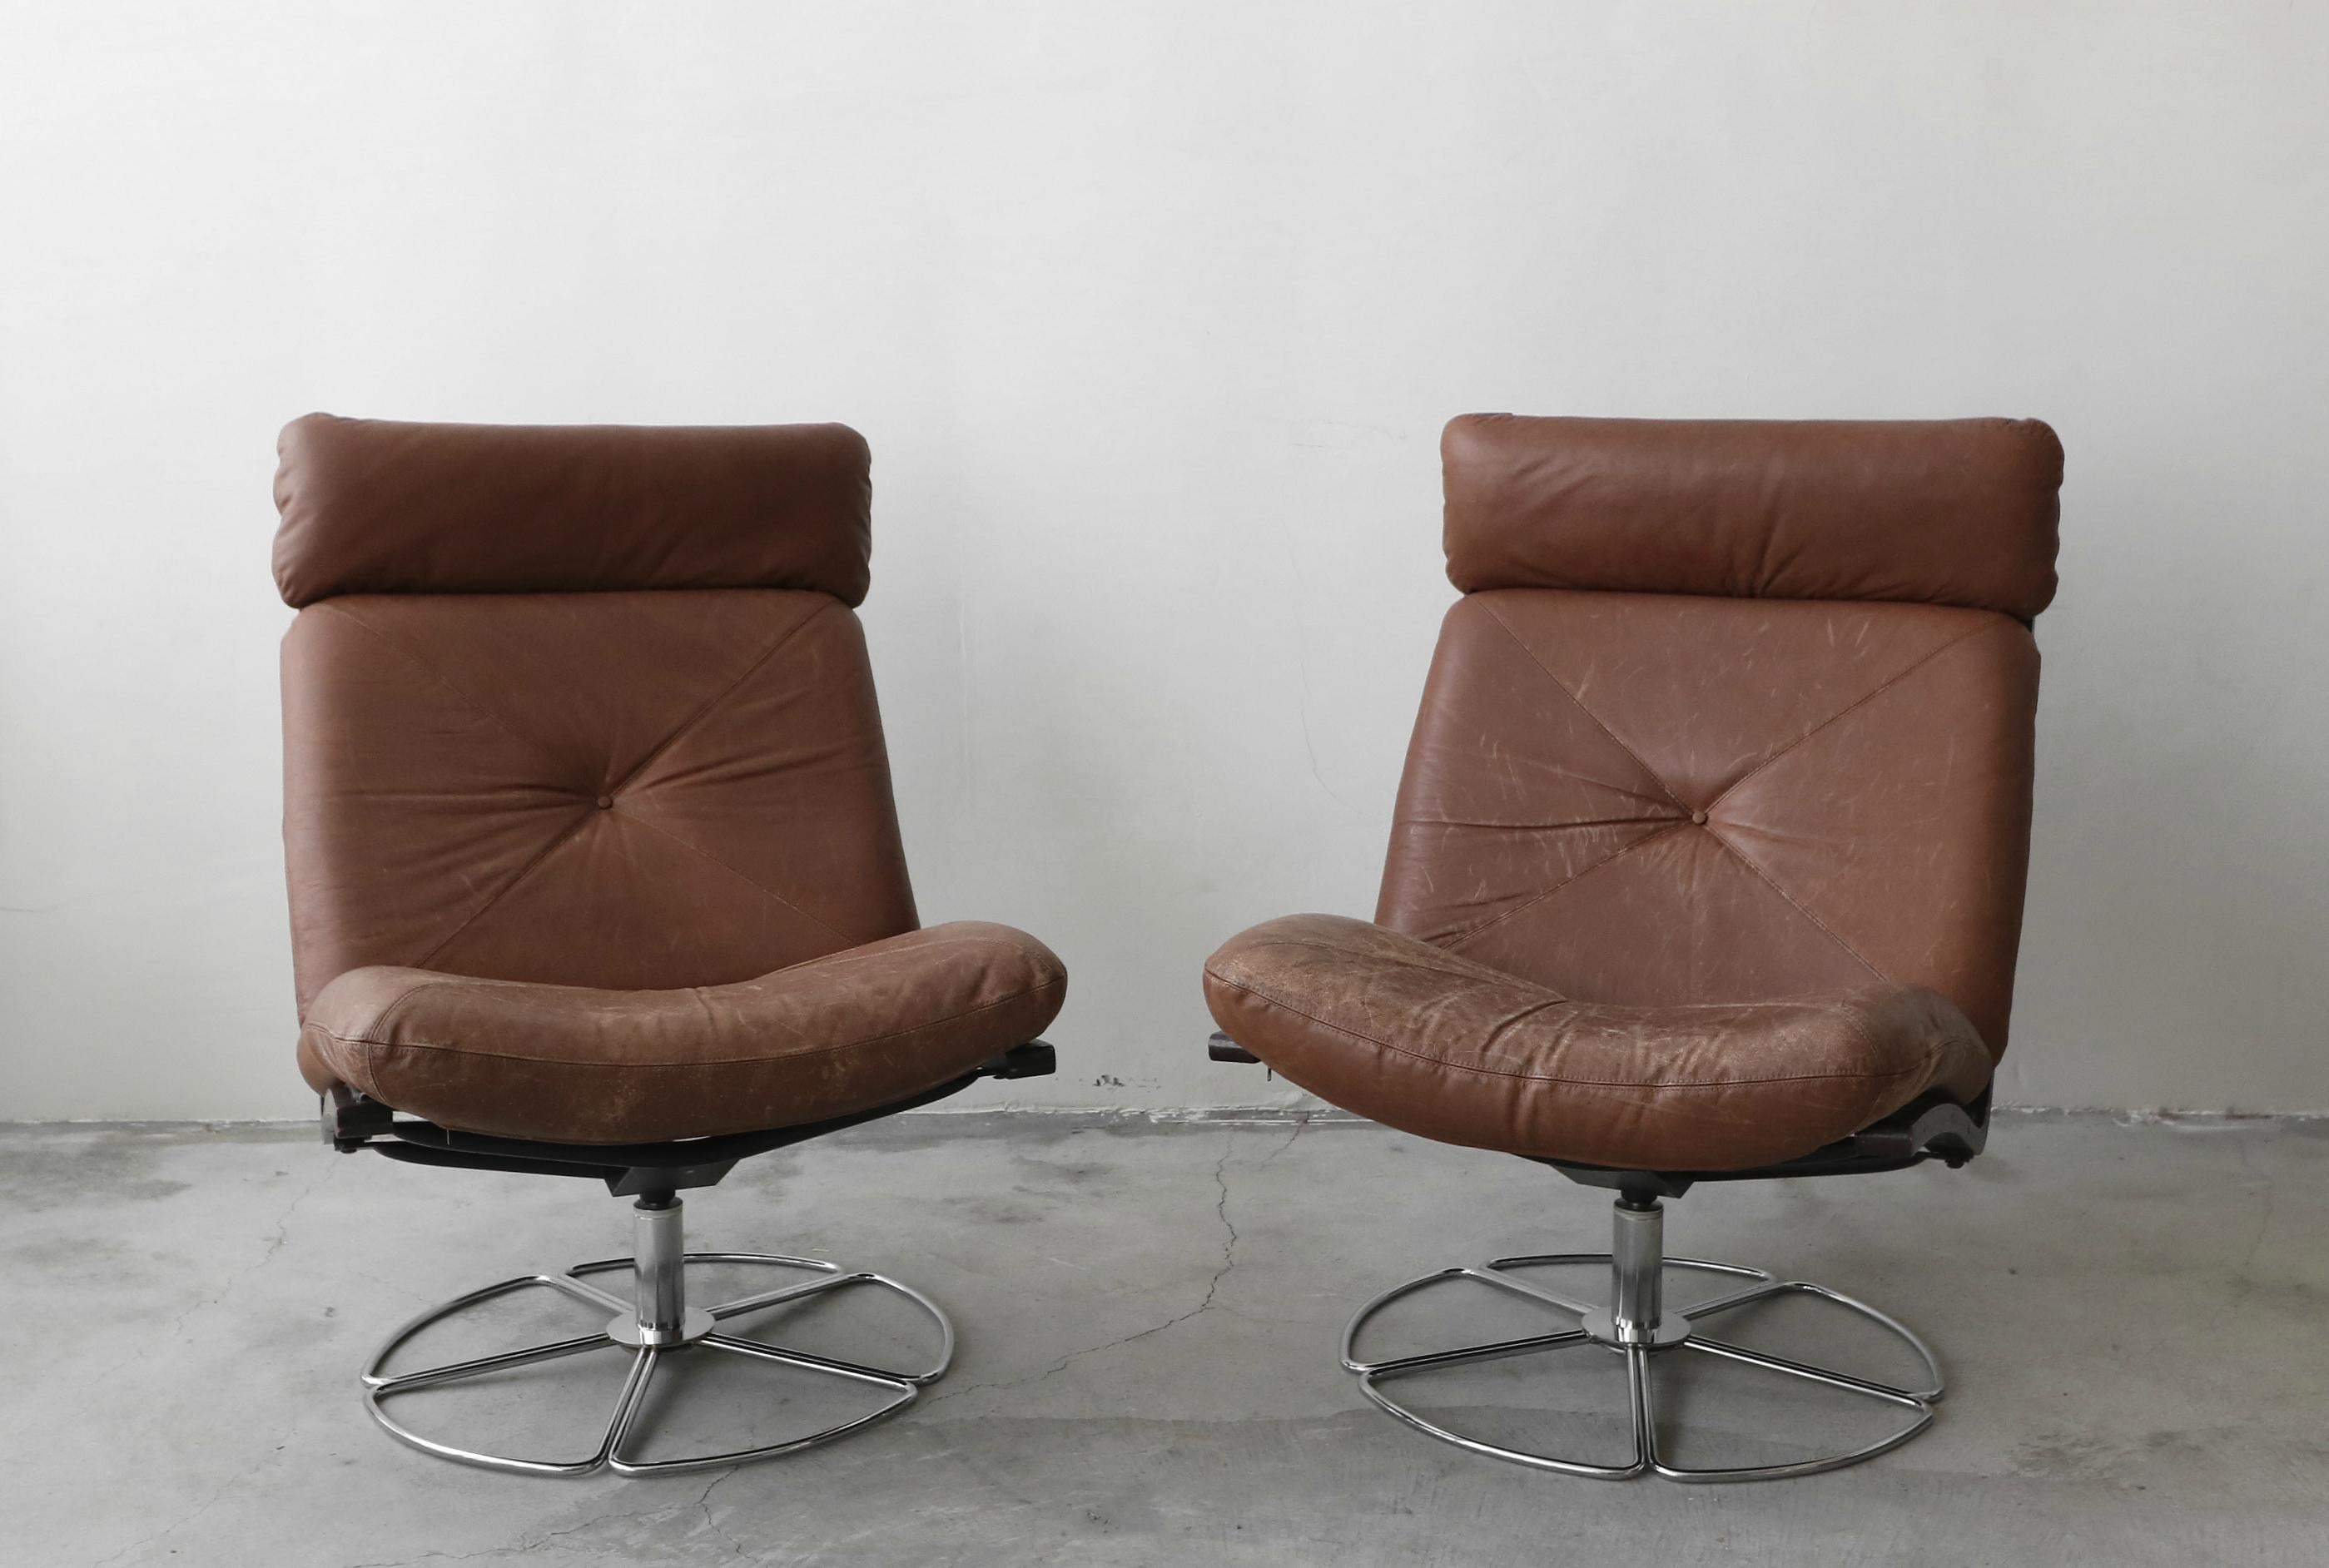 Minimalist Pair of Midcentury Leather and Chrome Swivel Lounge Chairs